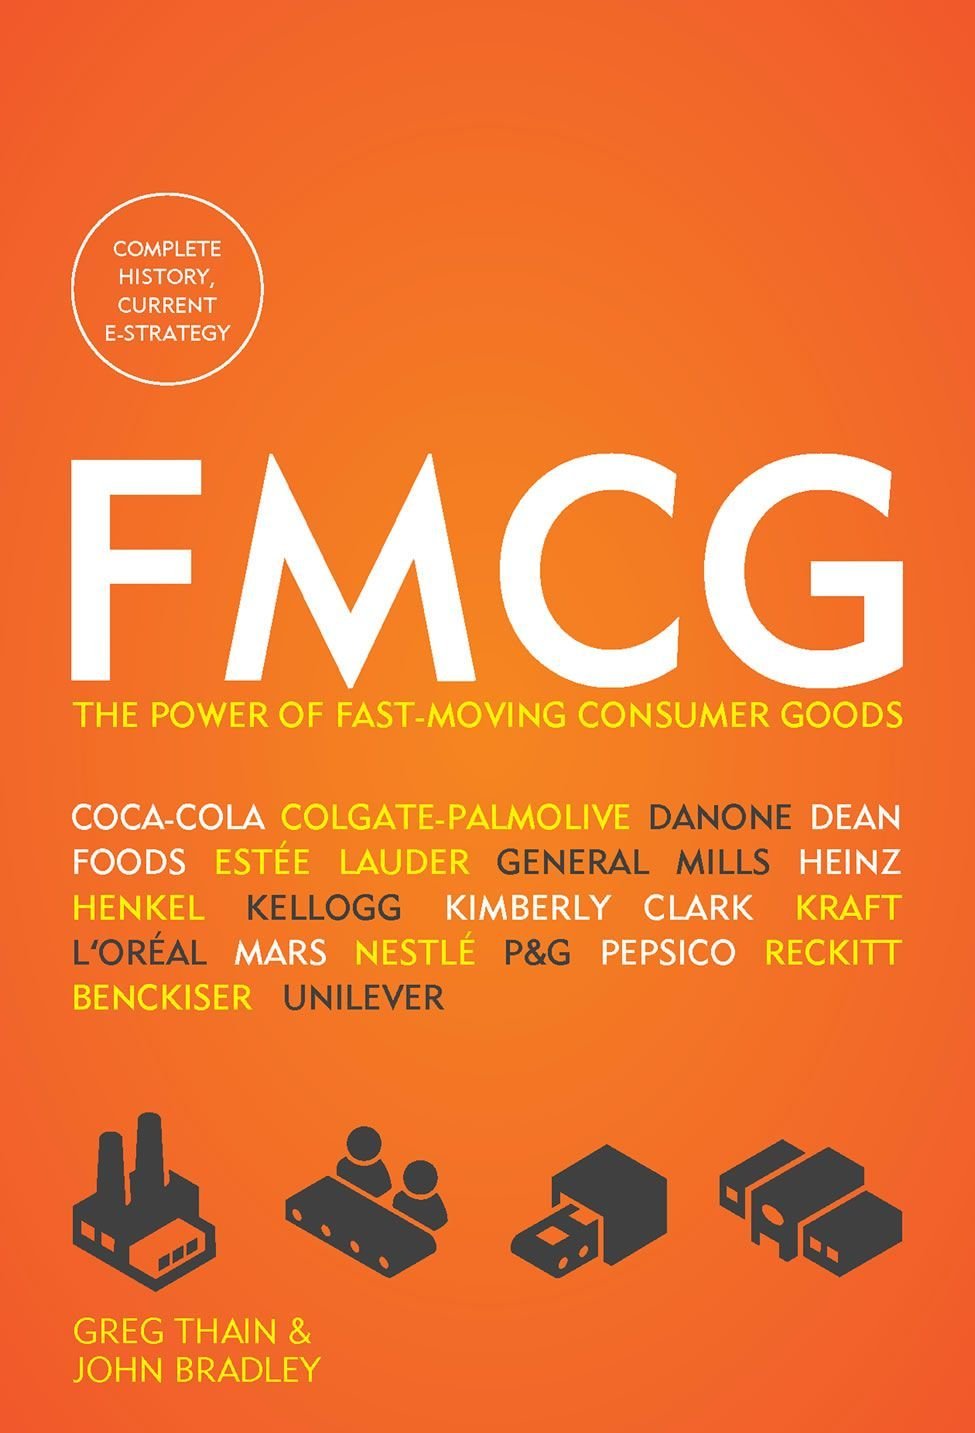 Download FMCG The Power of FastMoving Consumer Goods SoftArchive